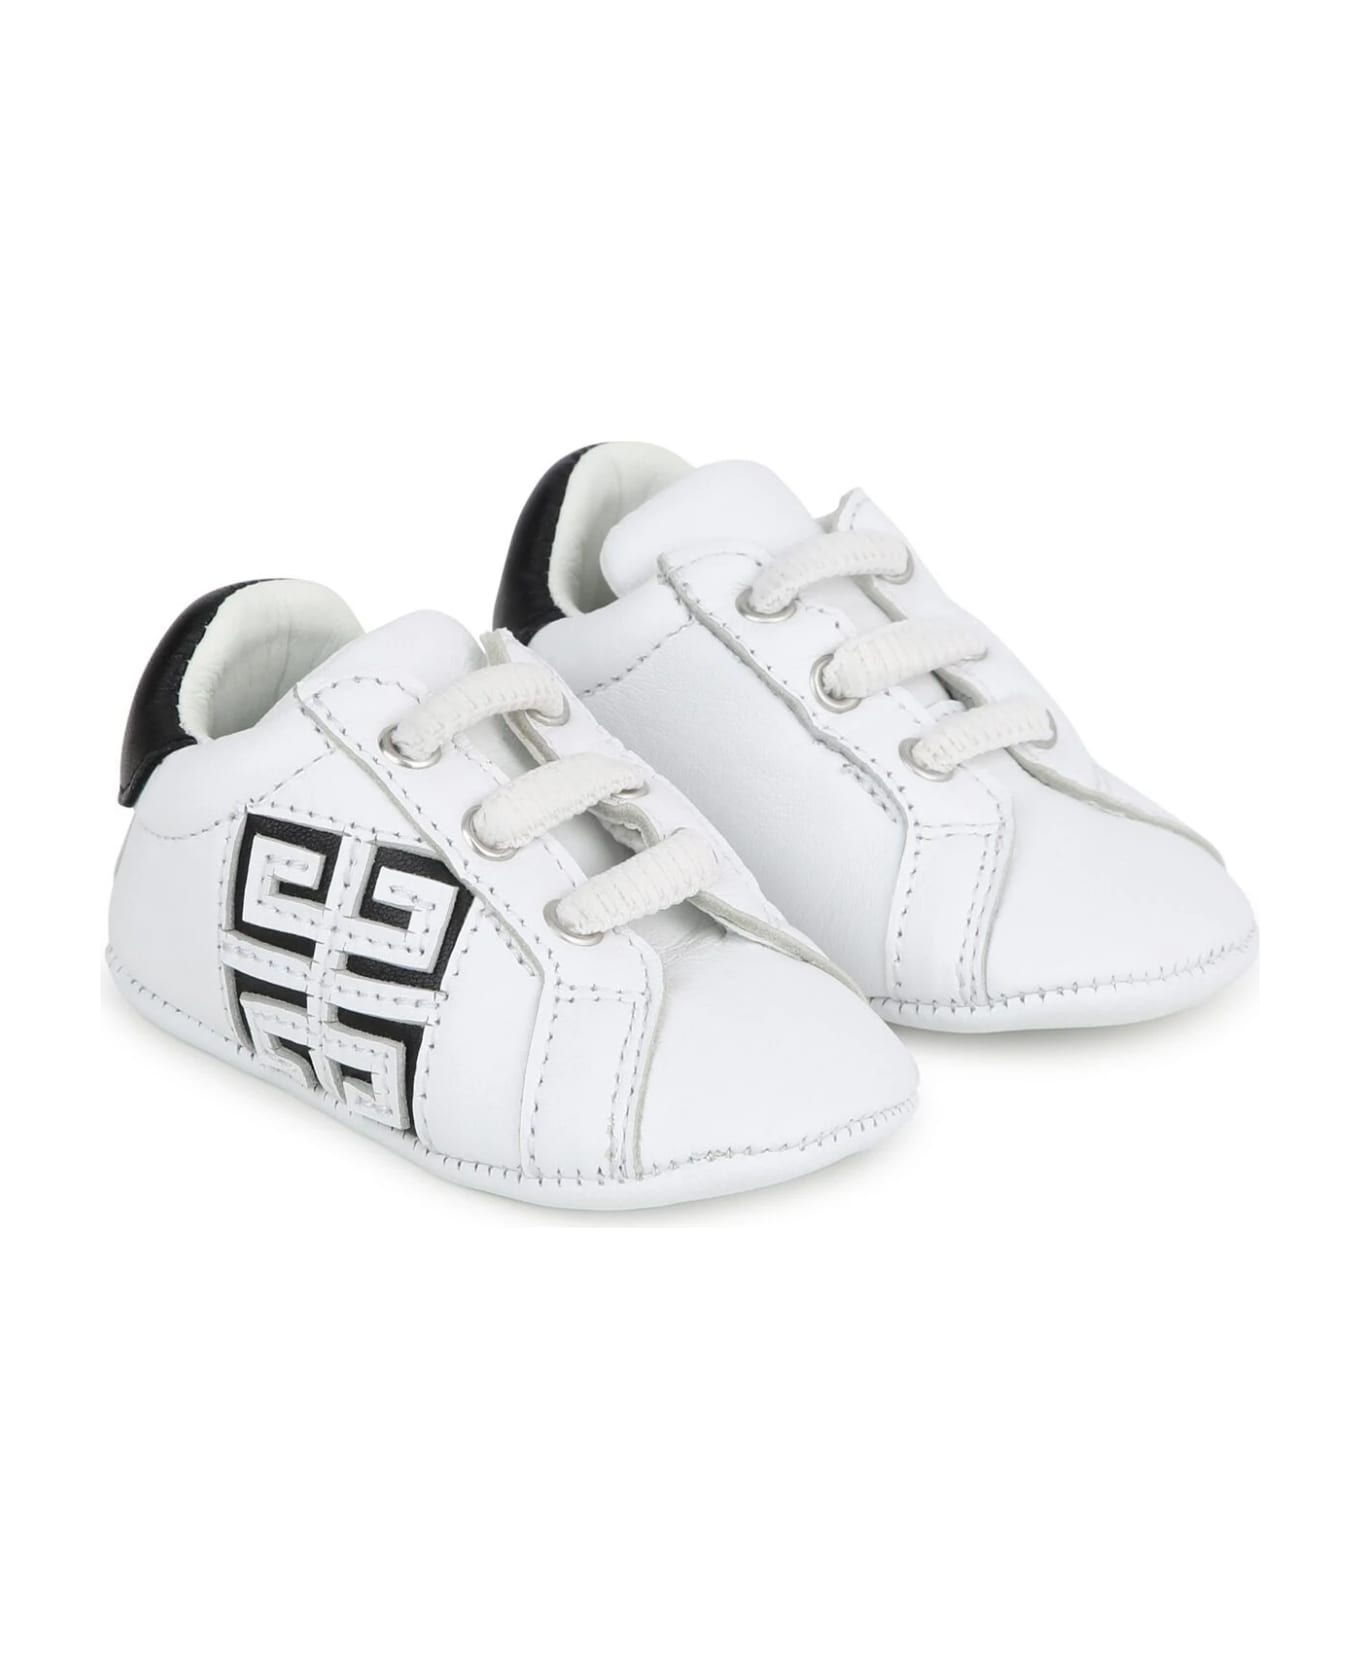 Givenchy White And Black 4g Sneakers - White